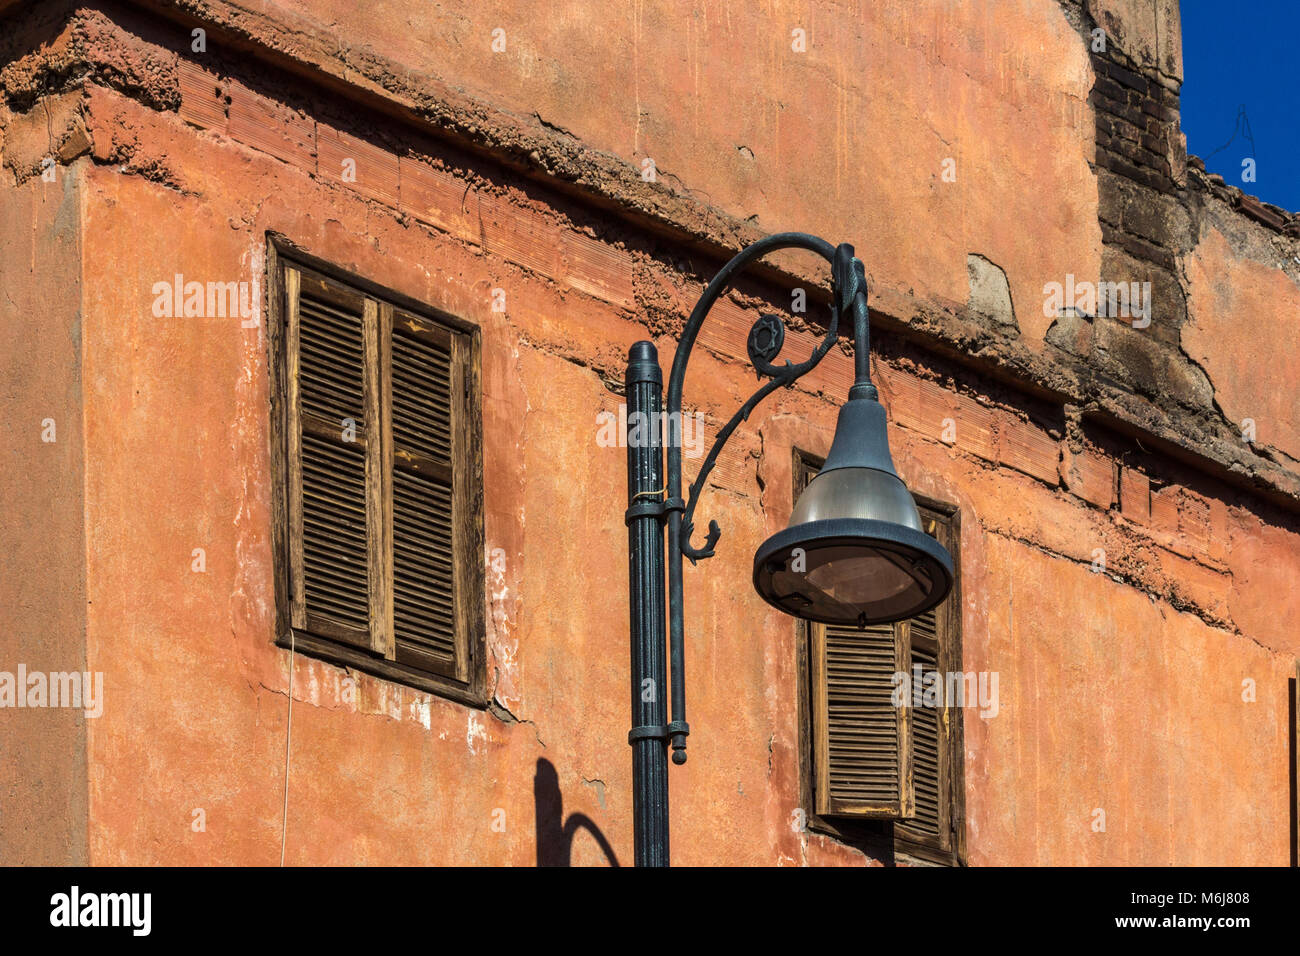 Street lamp against a terracotta-coloured building with old wooden shutters, against a dark blue sky. Marrakesh. Morocco. Stock Photo